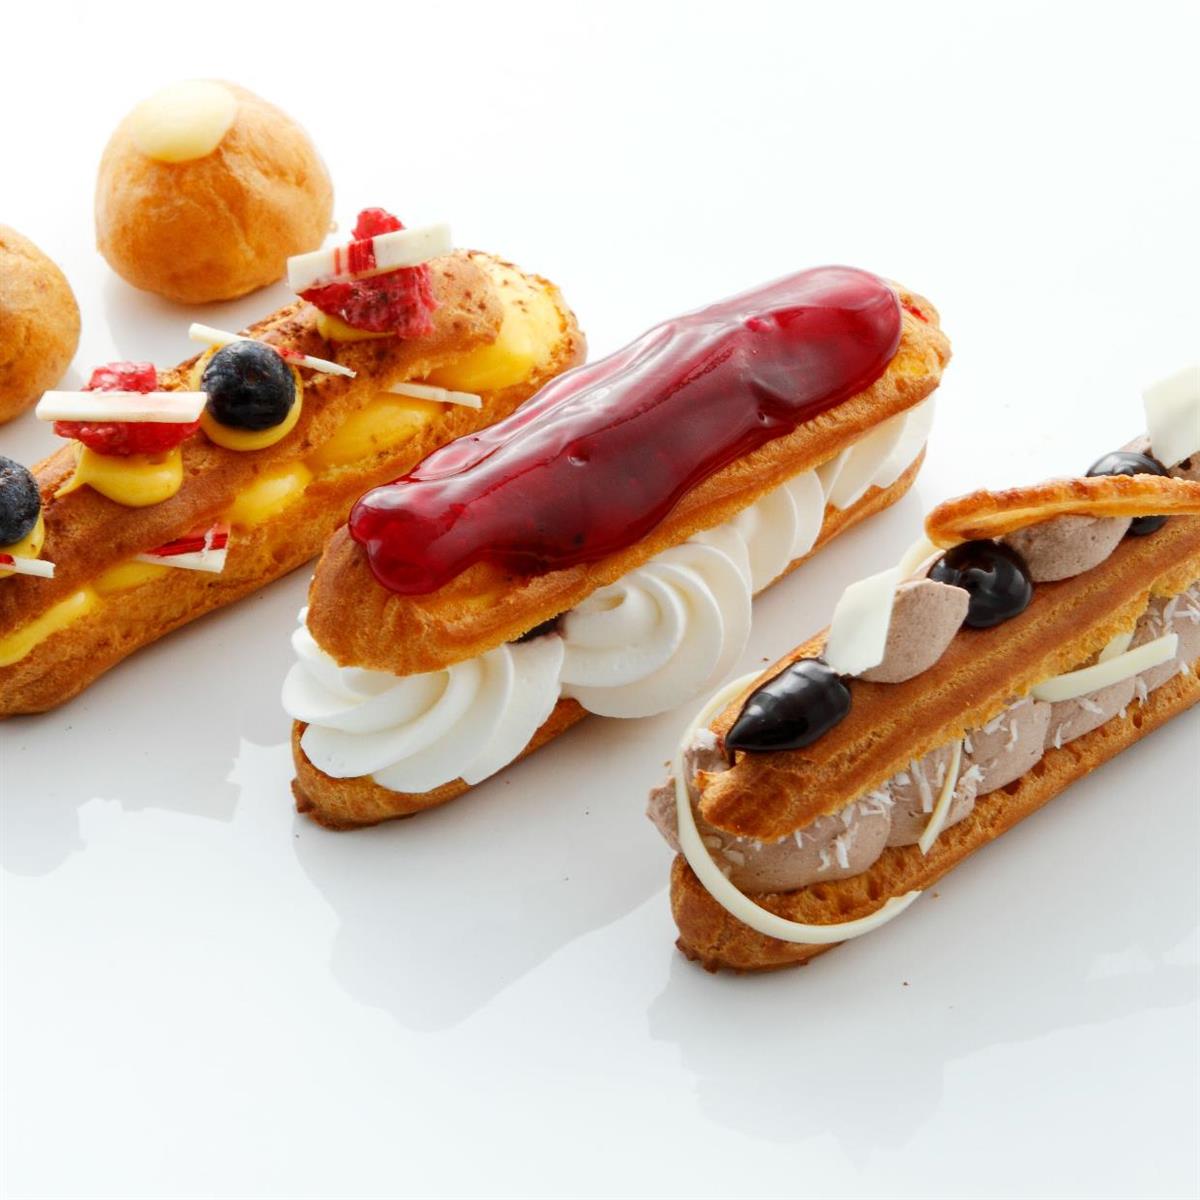 Cream puffs and éclairs